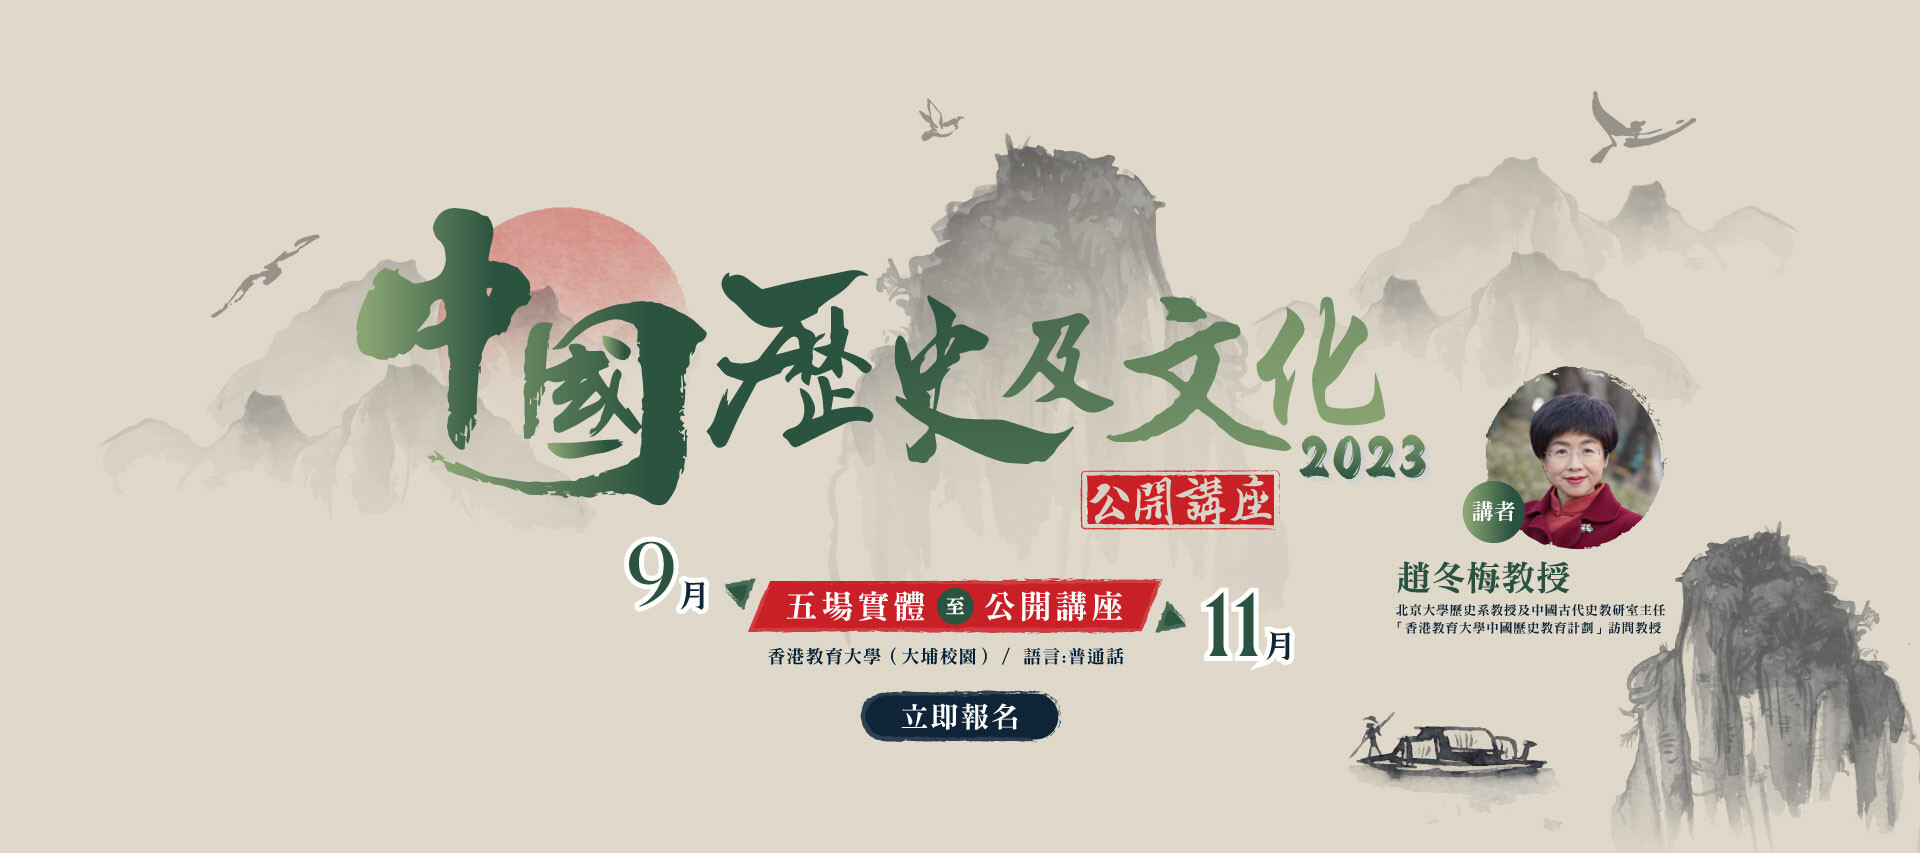 Public Lectures on Chinese History and Culture 2023 (Prof Zhao)